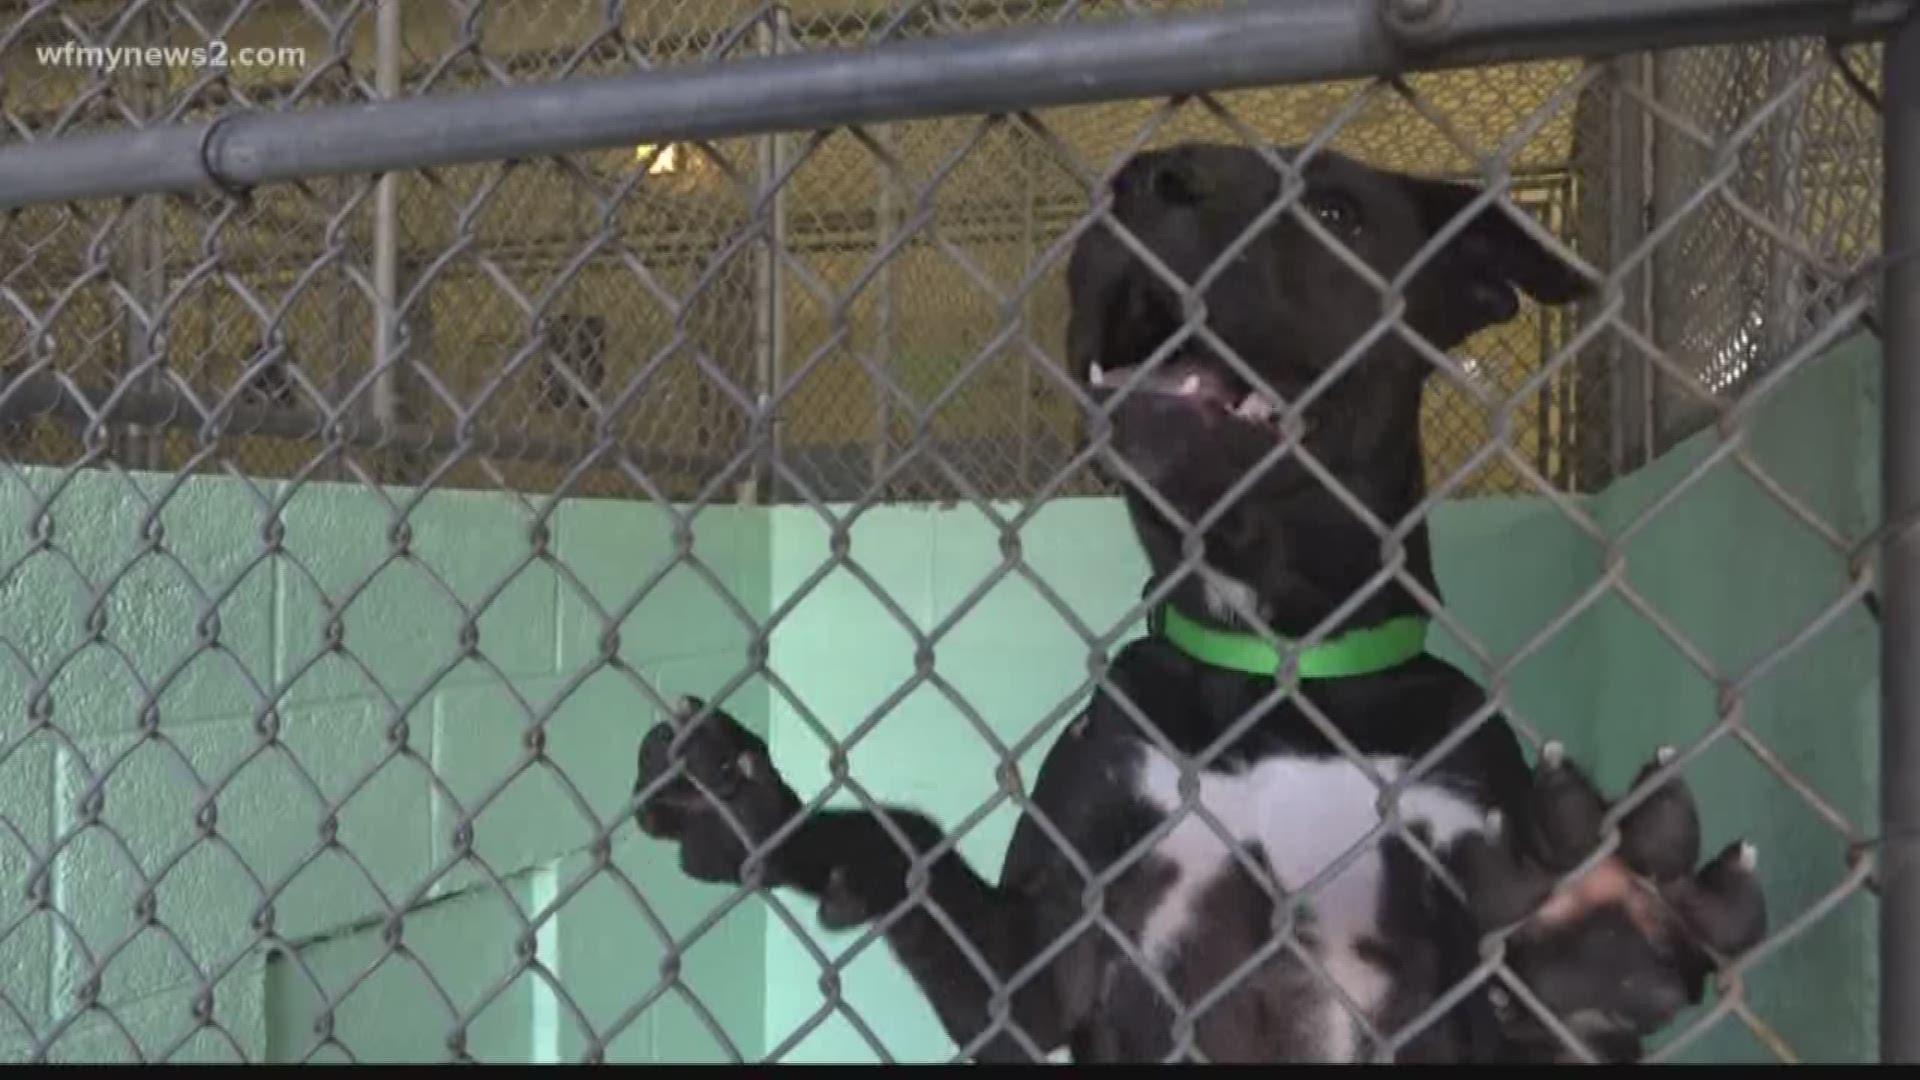 The bill says If someone is convicted of animal abuse, their name and picture would go on an online list for two years.
Janelle Gingrich-Caudle with the Good Samaritans Society says this is a step in the right direction.